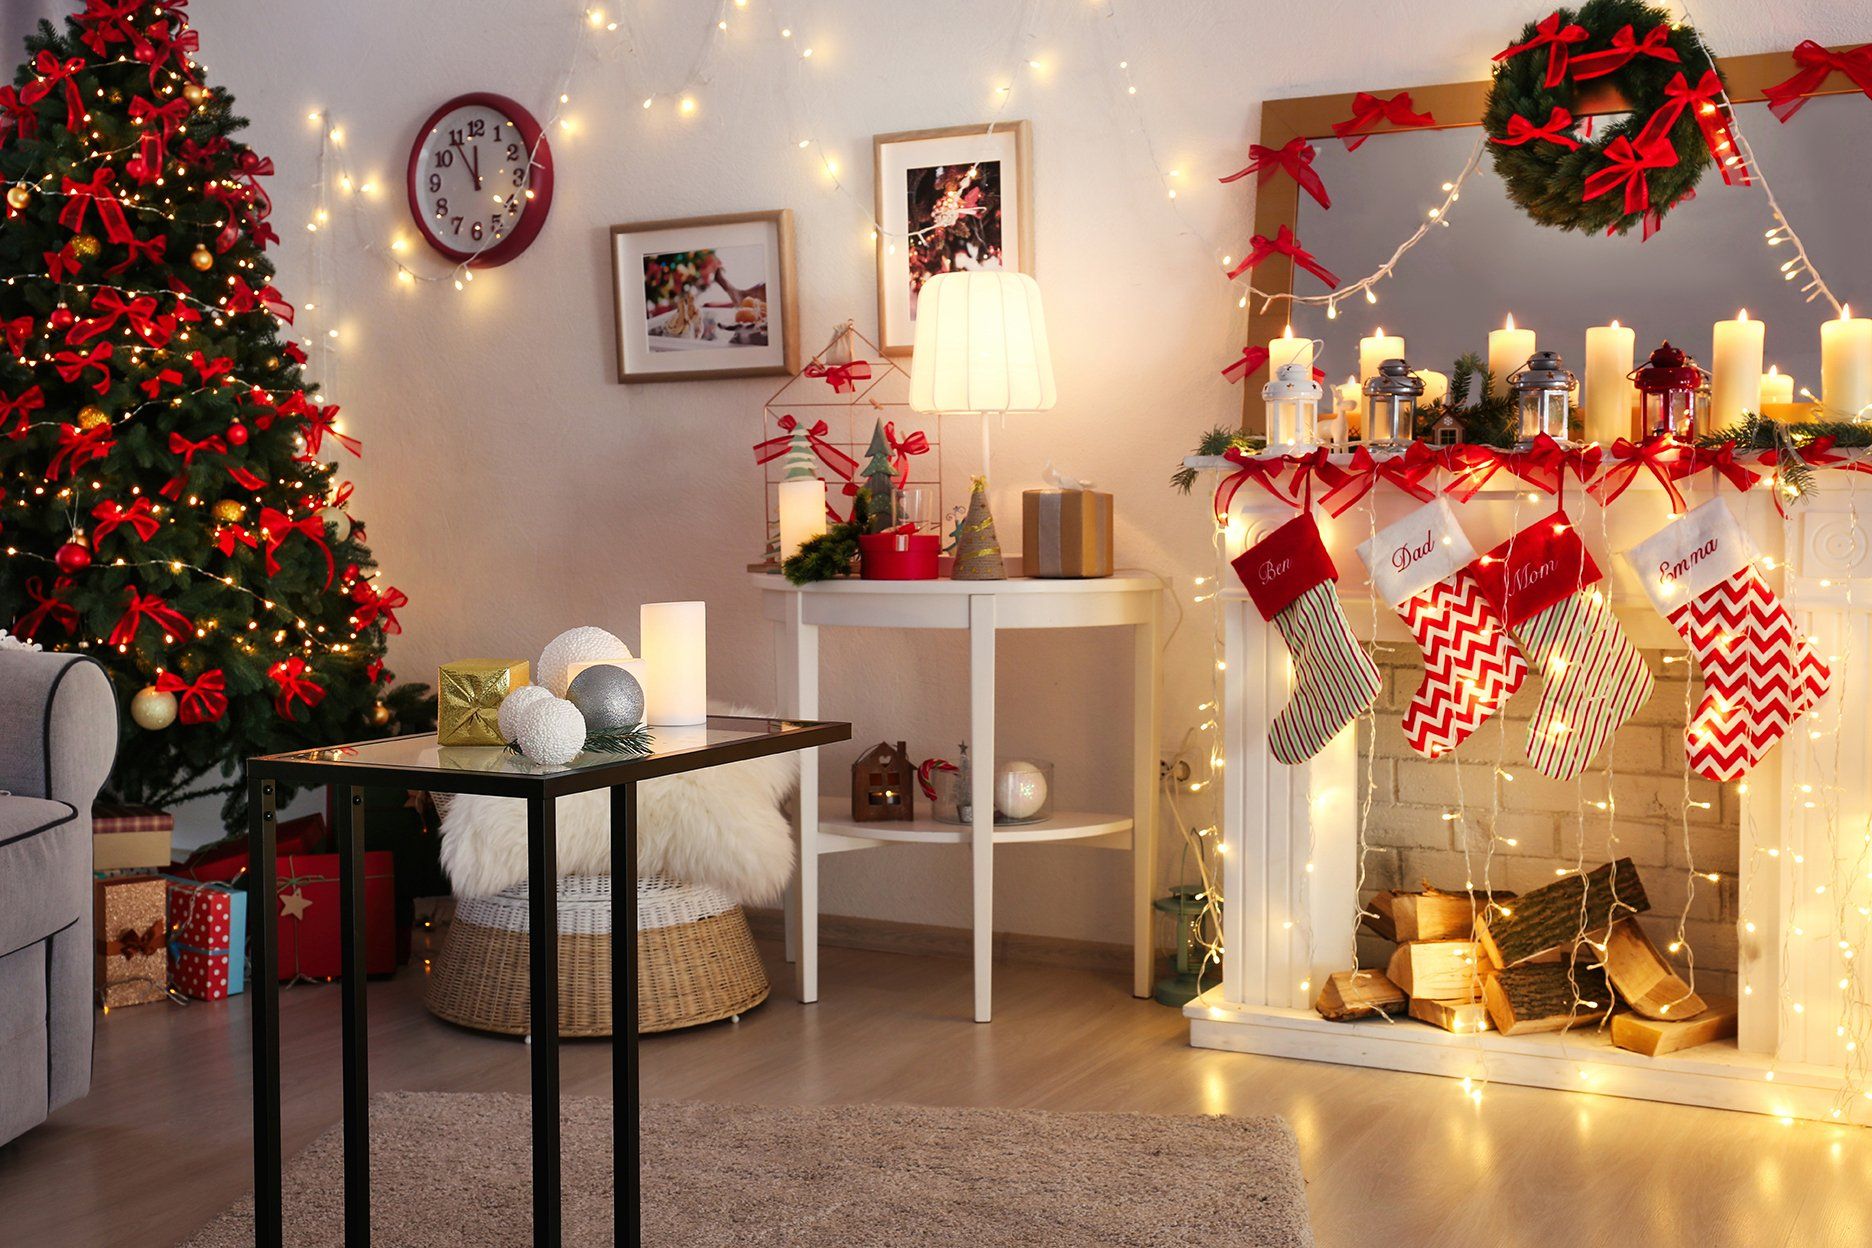 How To Celebrate Christmas In Your Manufactured Home On A Budget